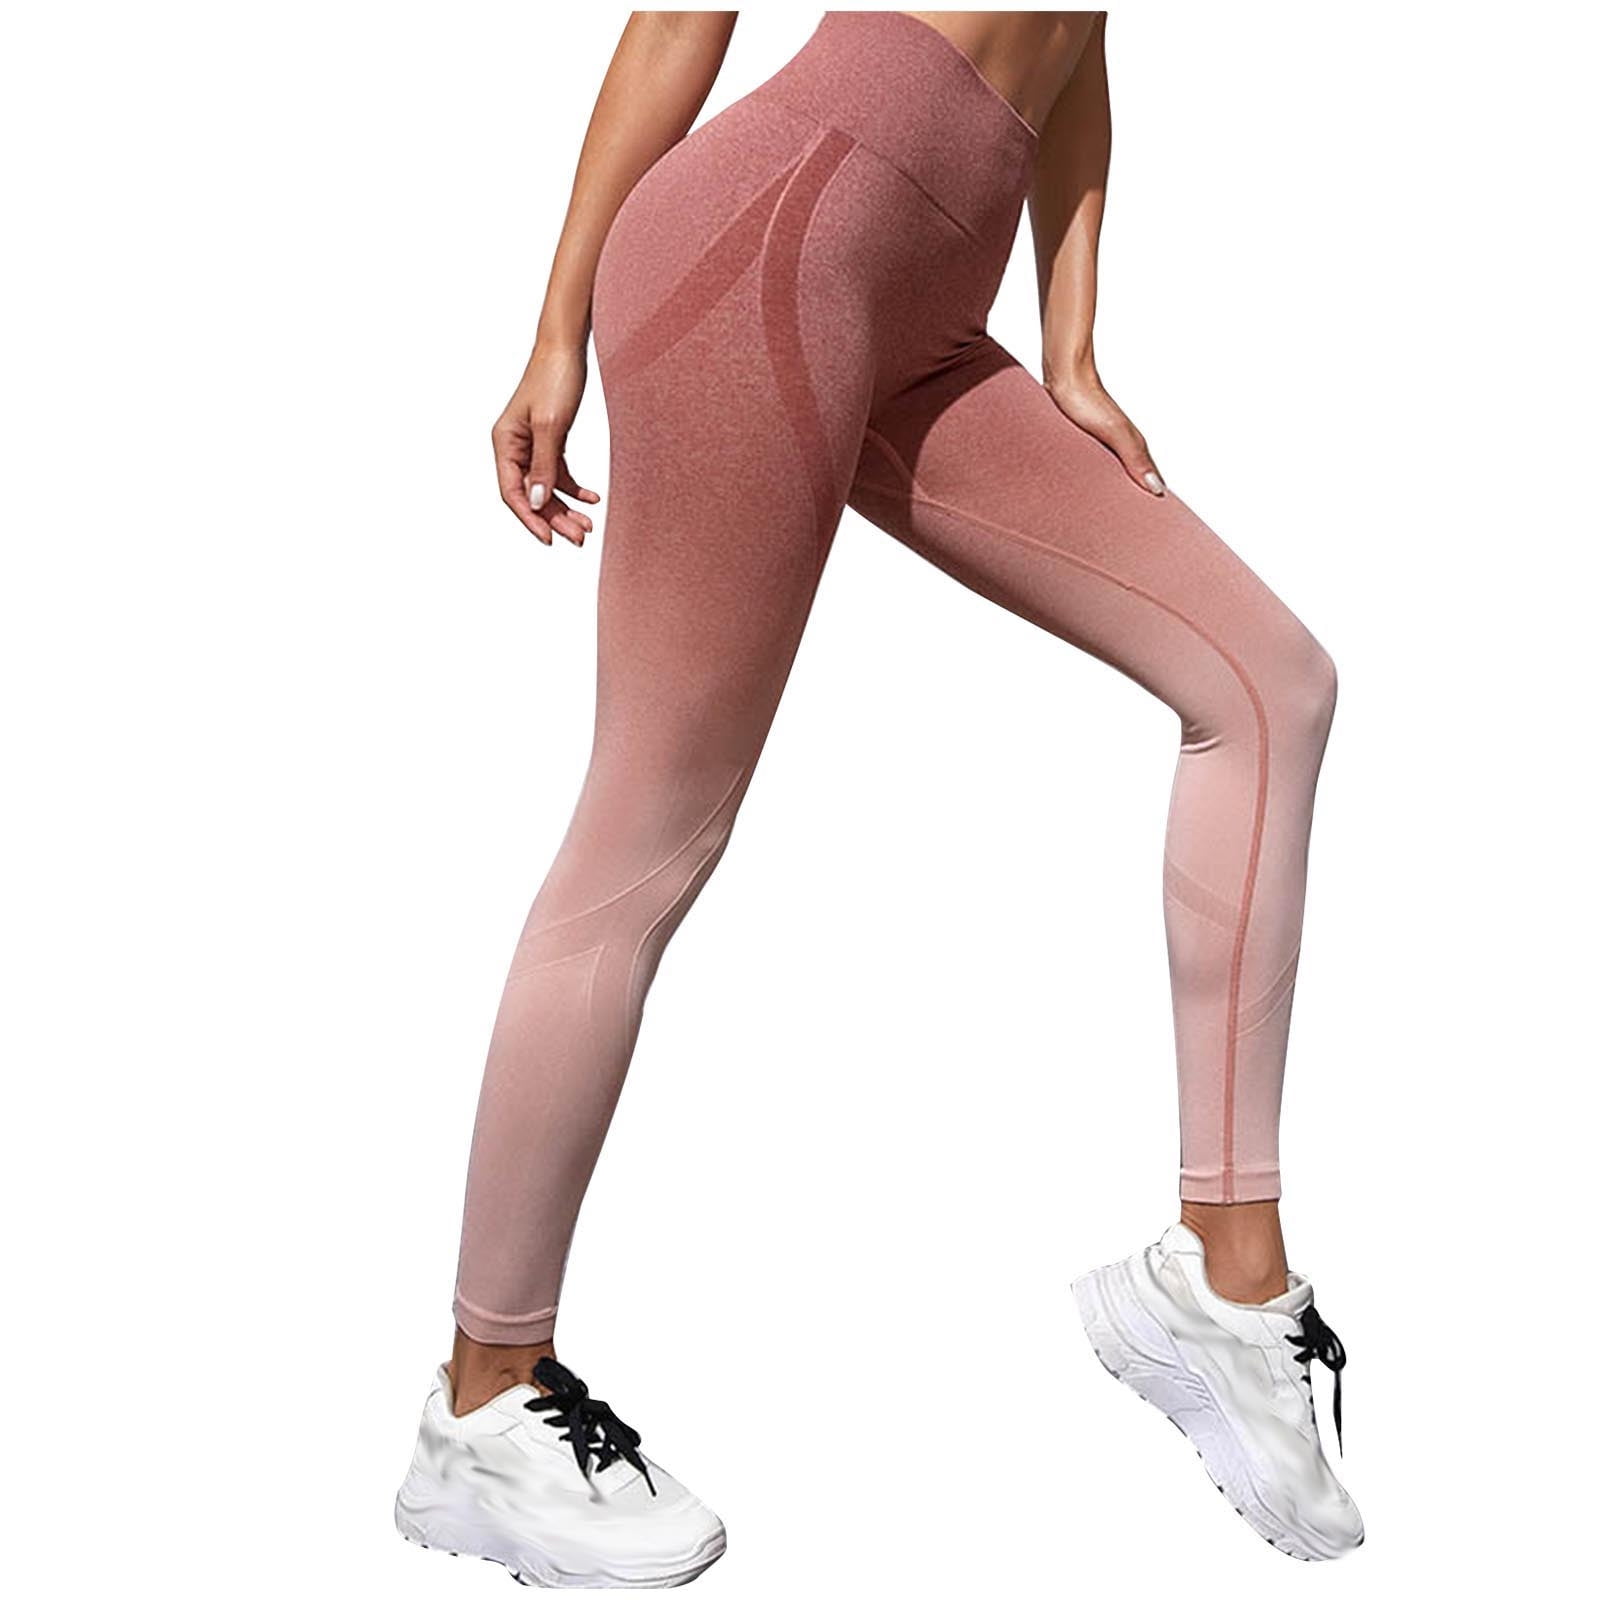 Smarty Pants Sports Leggings outlet  Women  1800 products on sale   FASHIOLAcouk